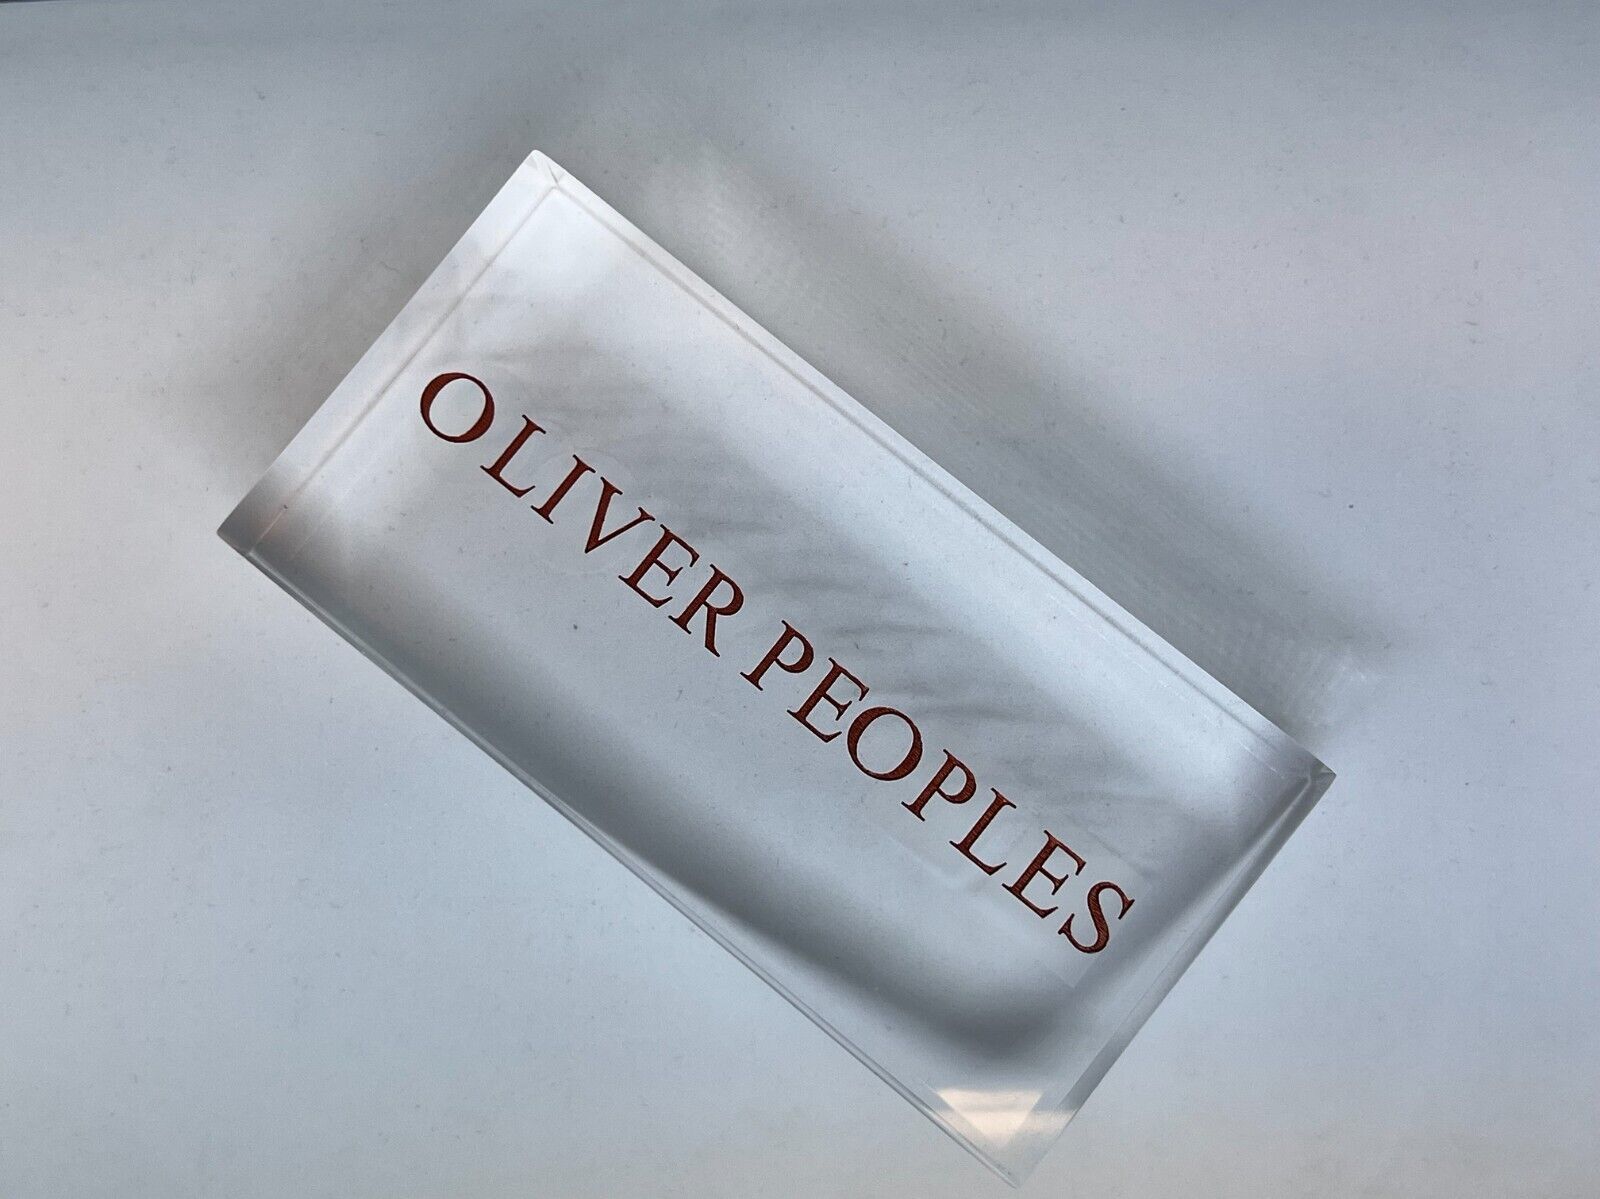 OLIVER PEOPLES DISPLAY LUXURY FASHION SHOWCASE GLASSES ELEGANT COMPACT SMALL